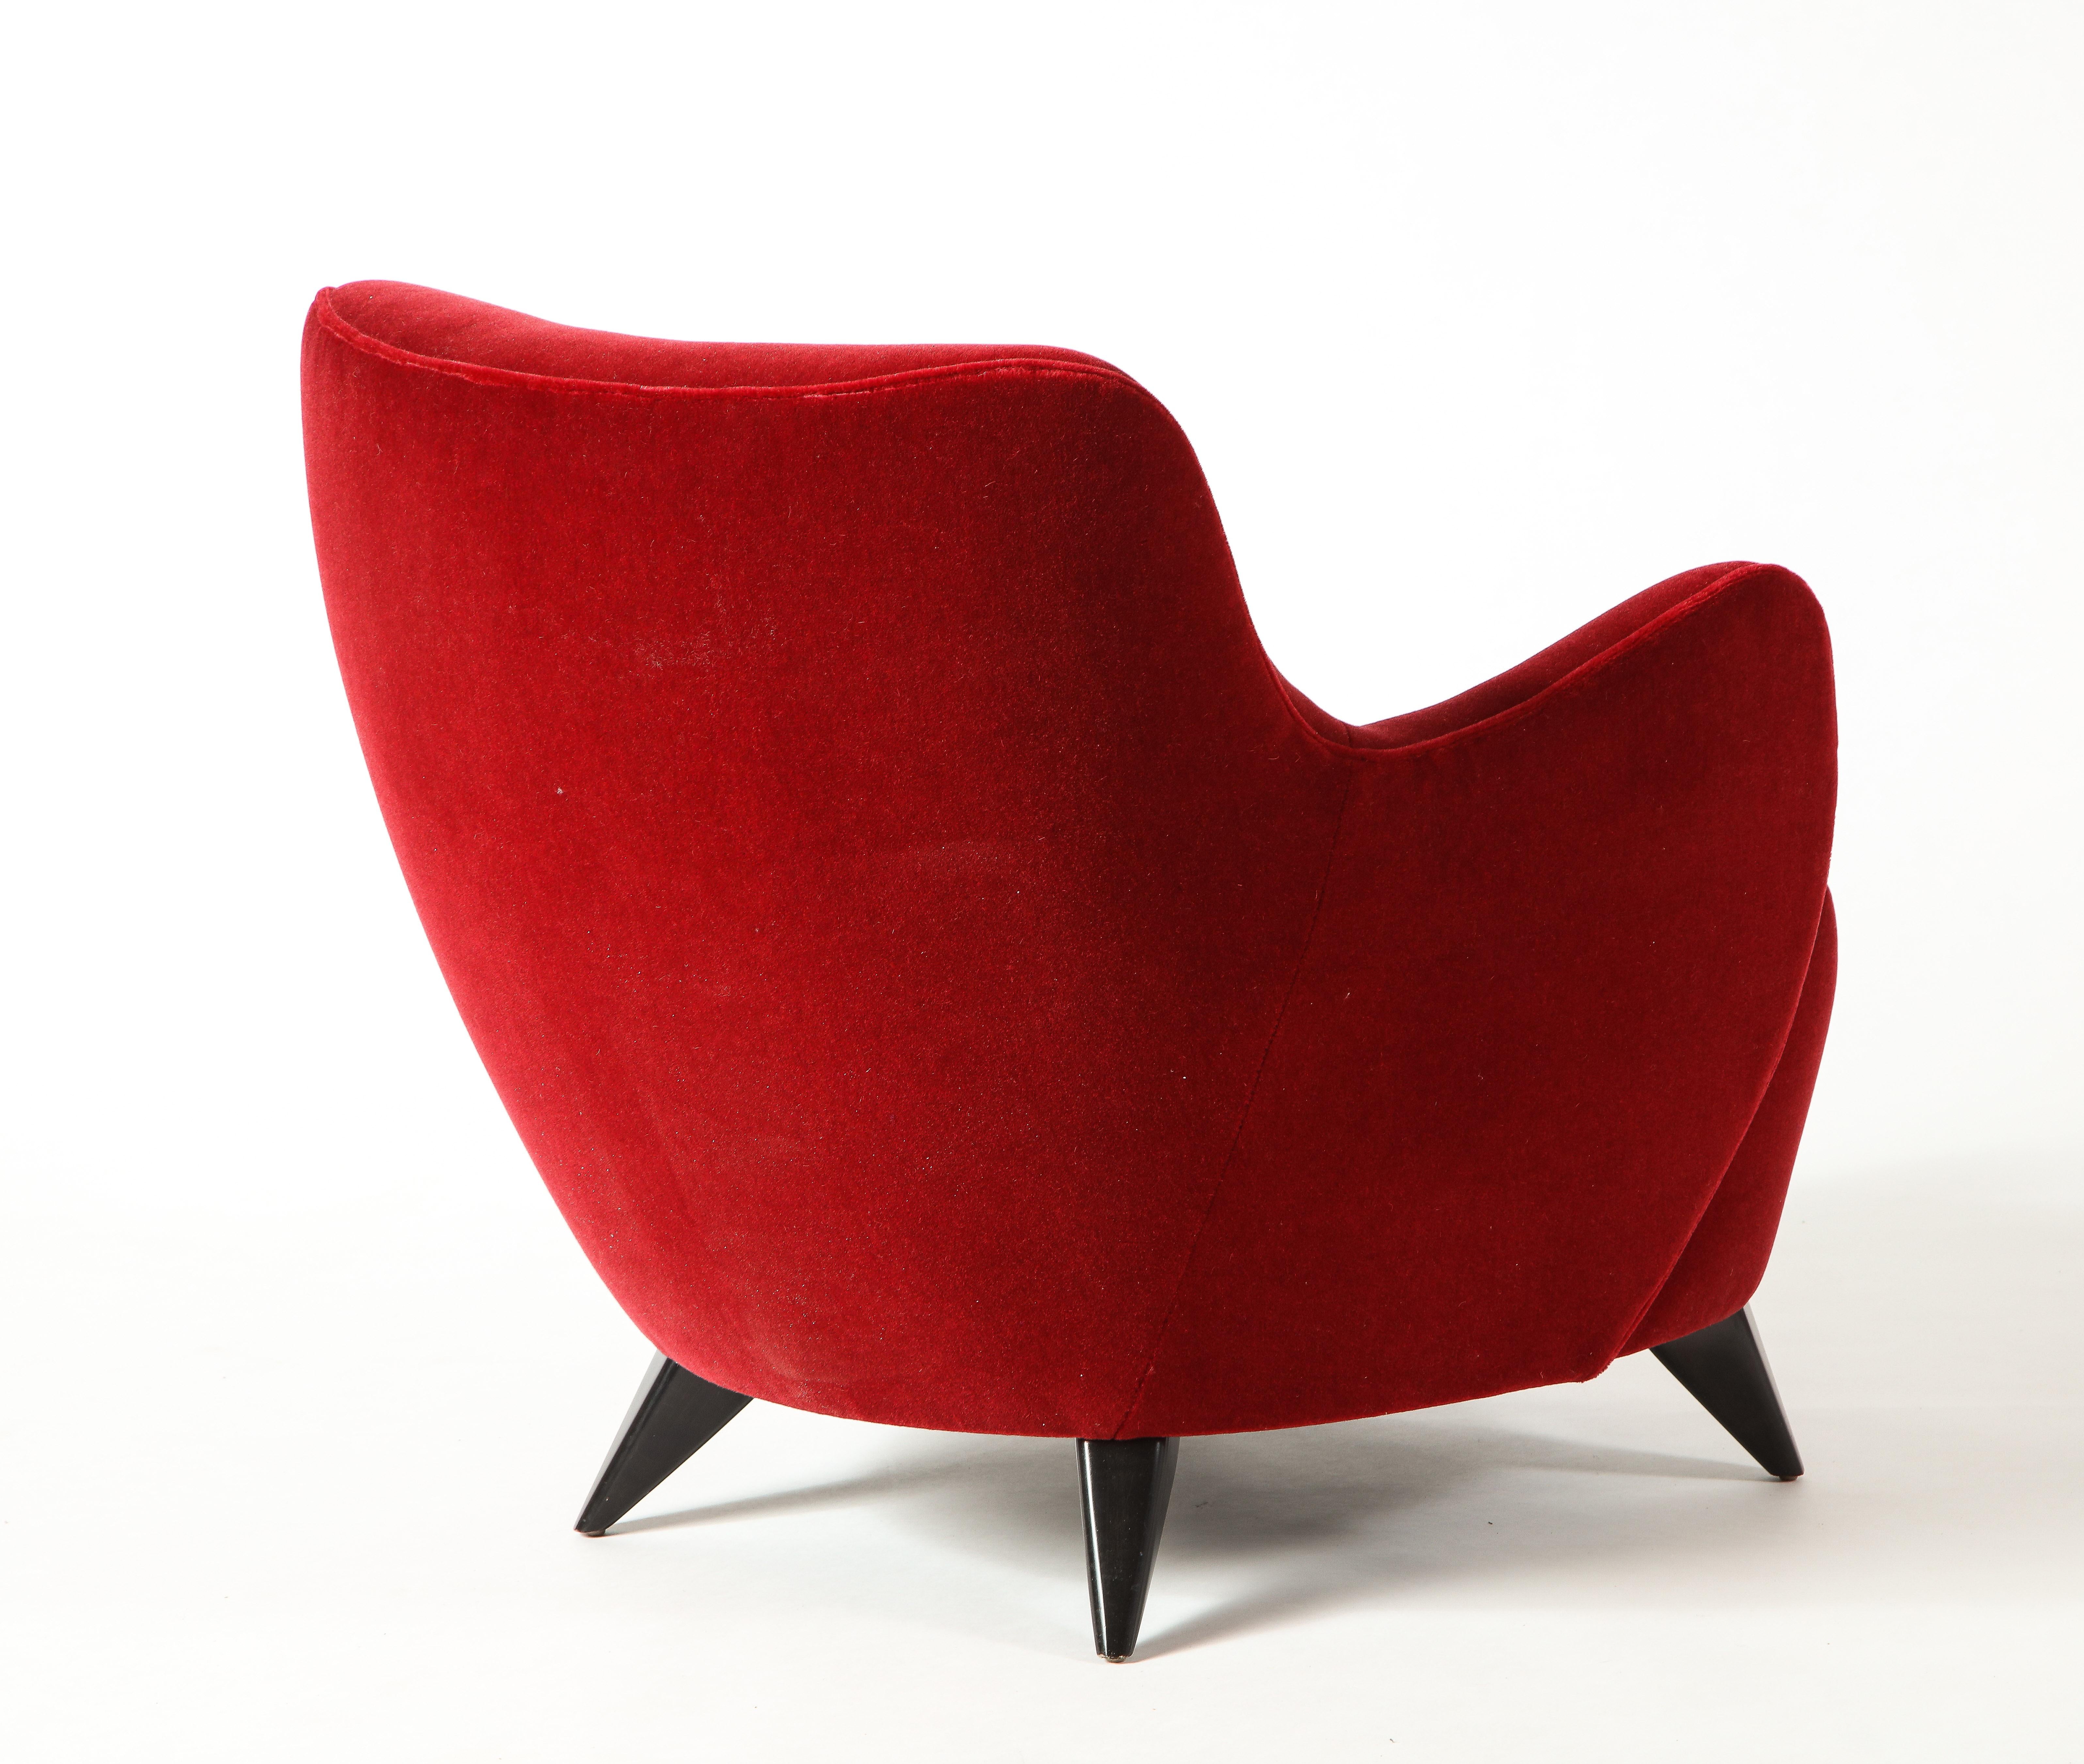 Contemporary Vladimir Kagan Barrel Chair in Red Mohair Upholstery with Ebony Base